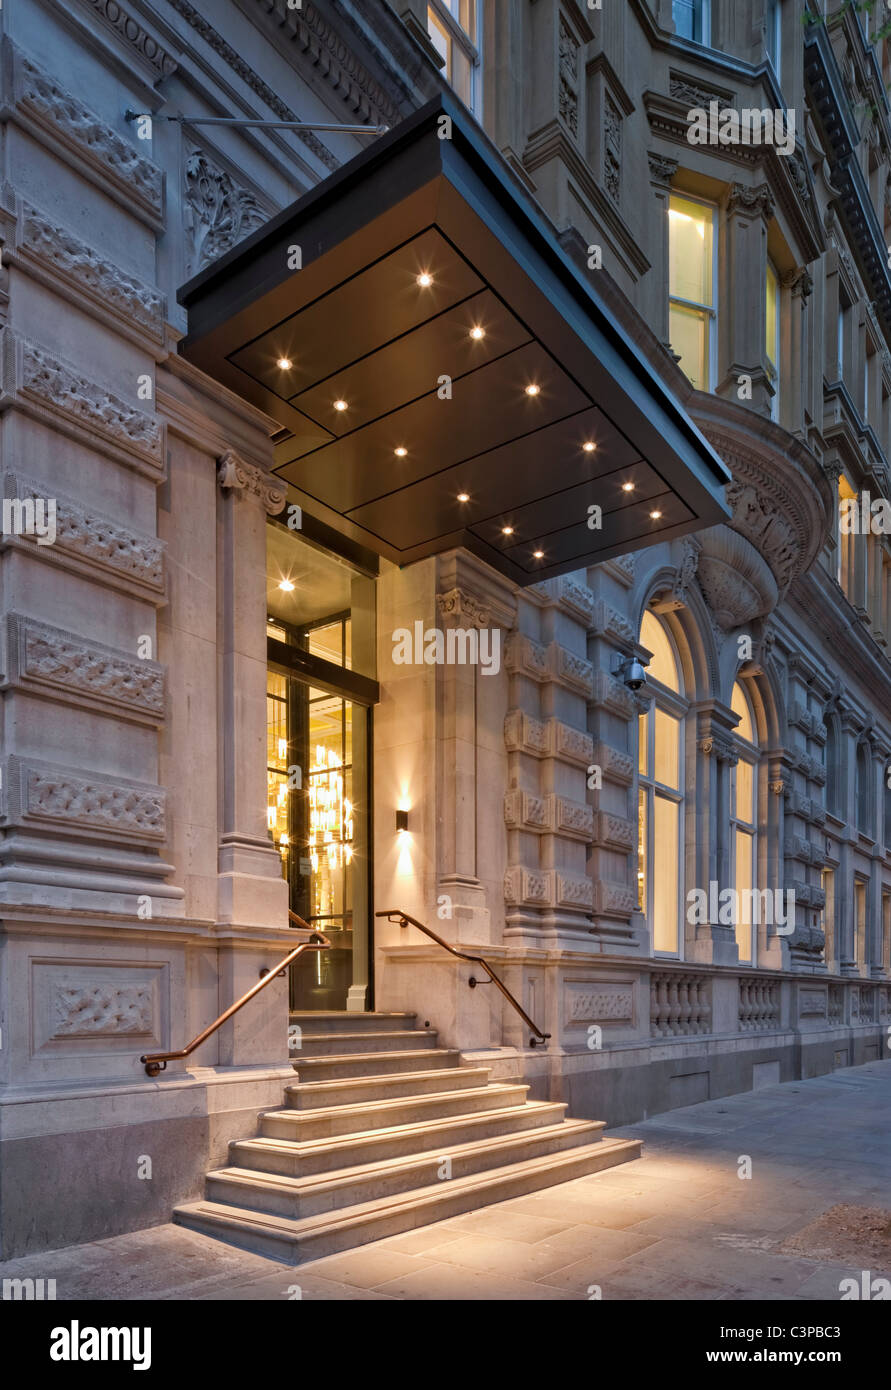 The Corinthia Hotel in Whitehall, London. Opened in April 2011. Stock Photo